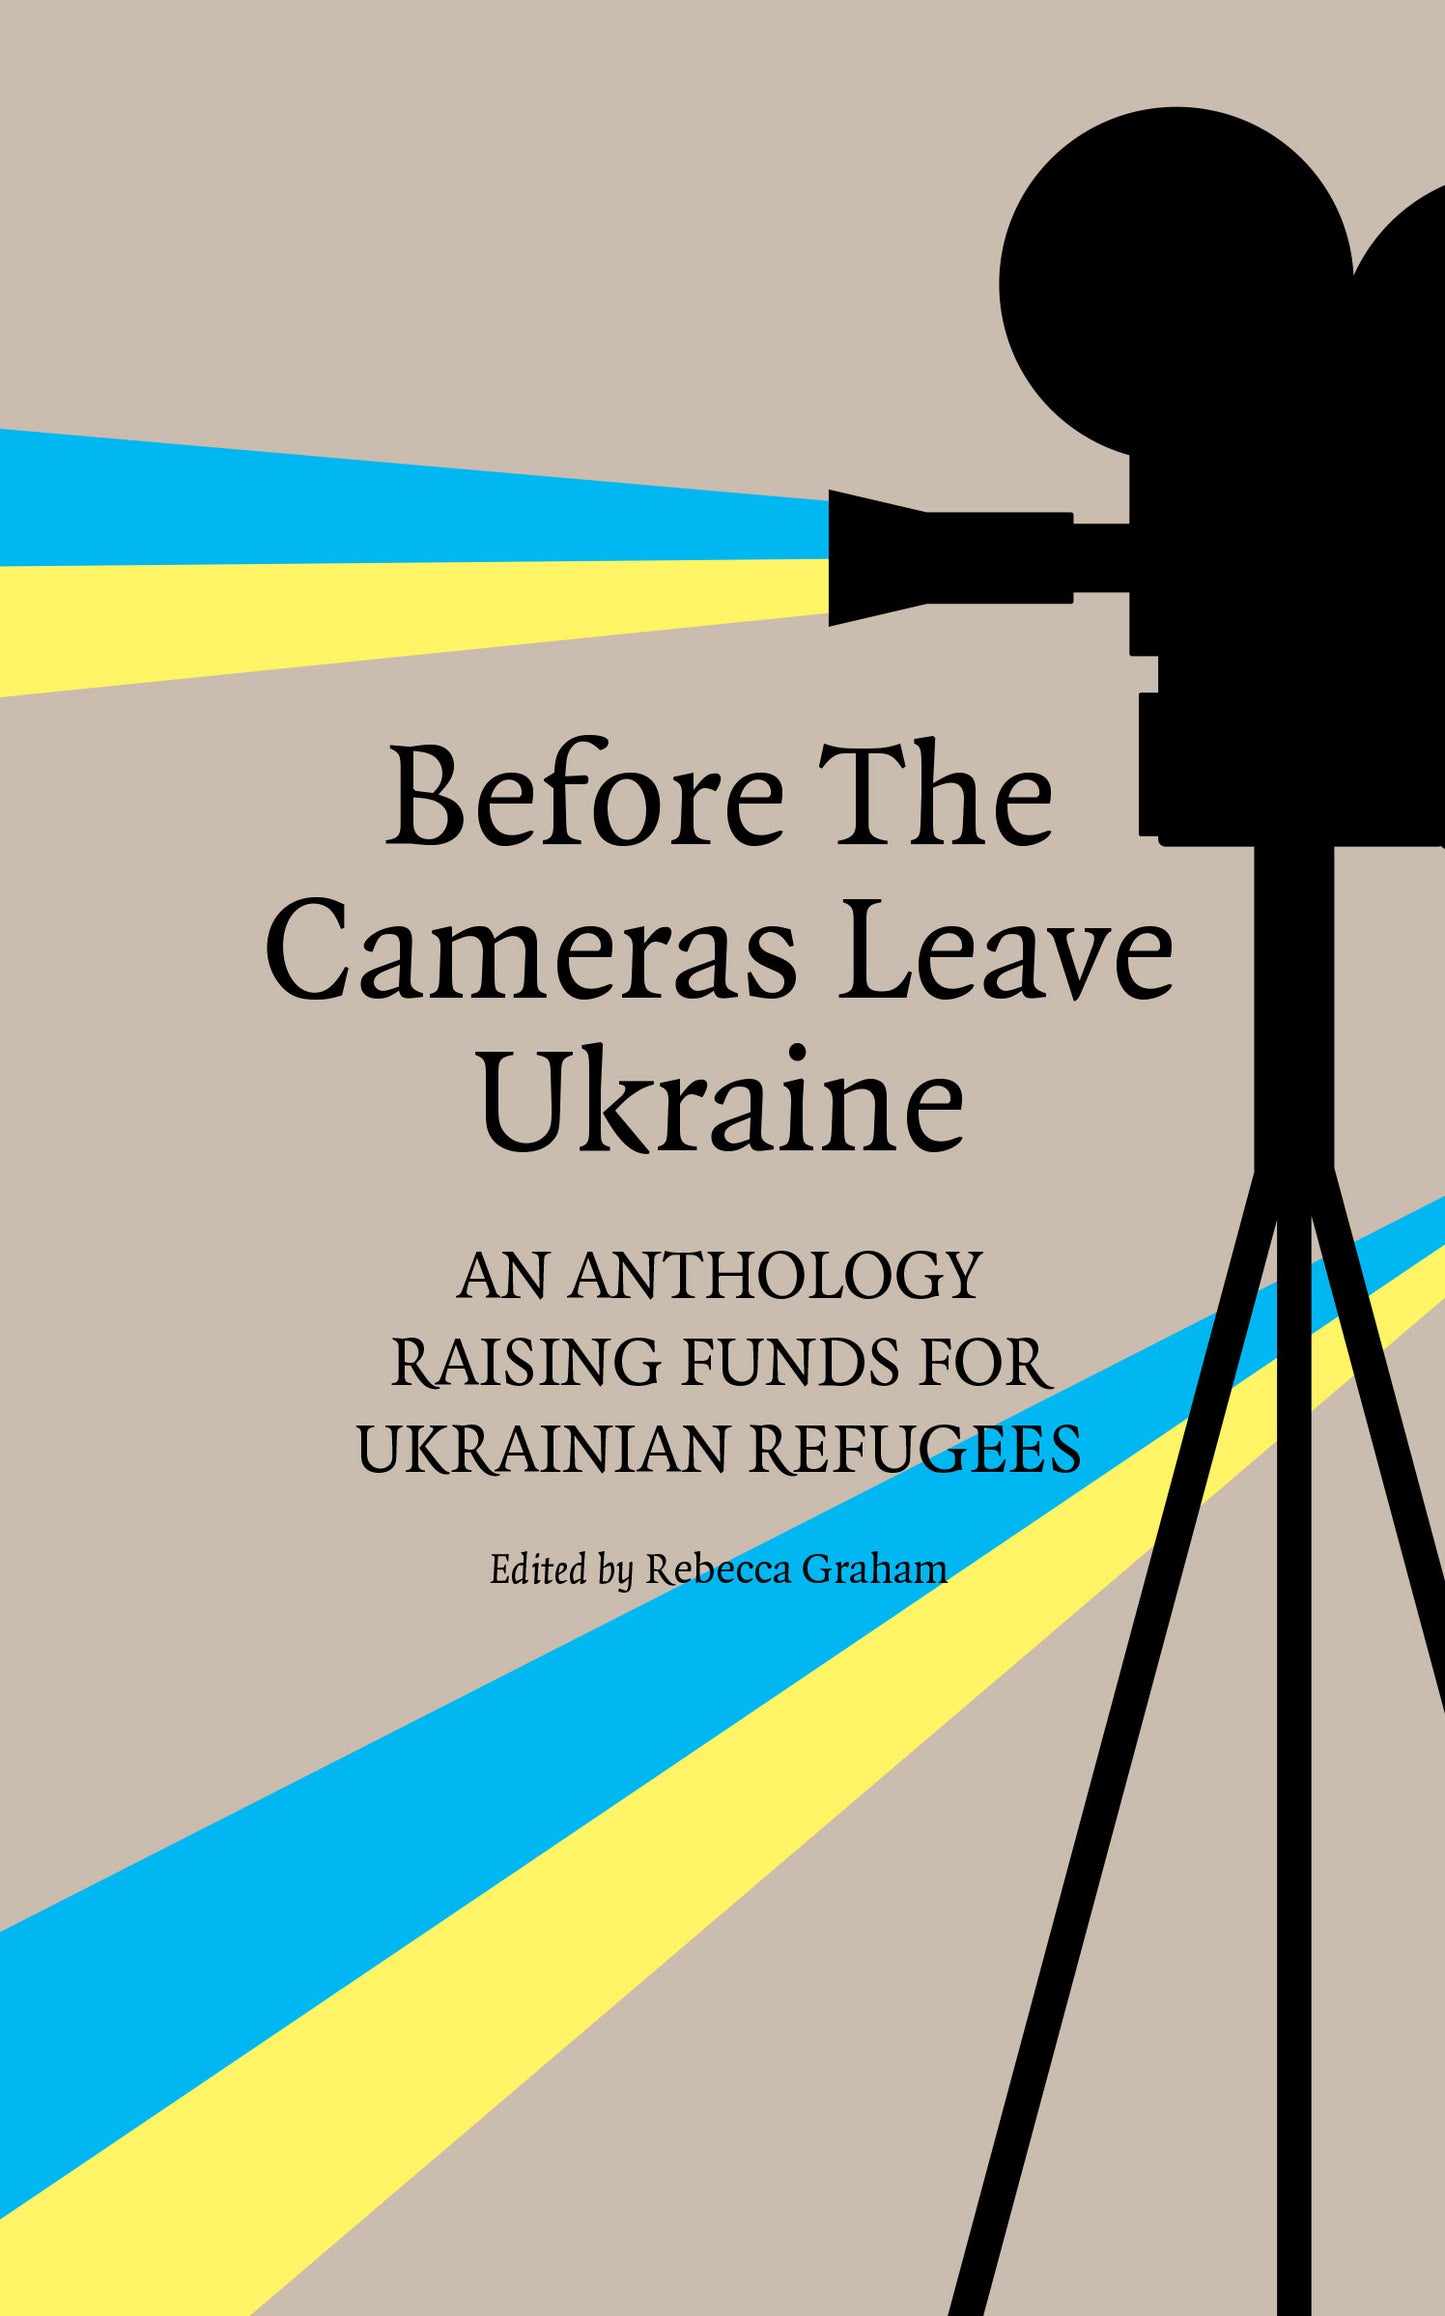 Before the Cameras Leave Ukraine: An Anthology Raising Funds for Ukrainian Refugees